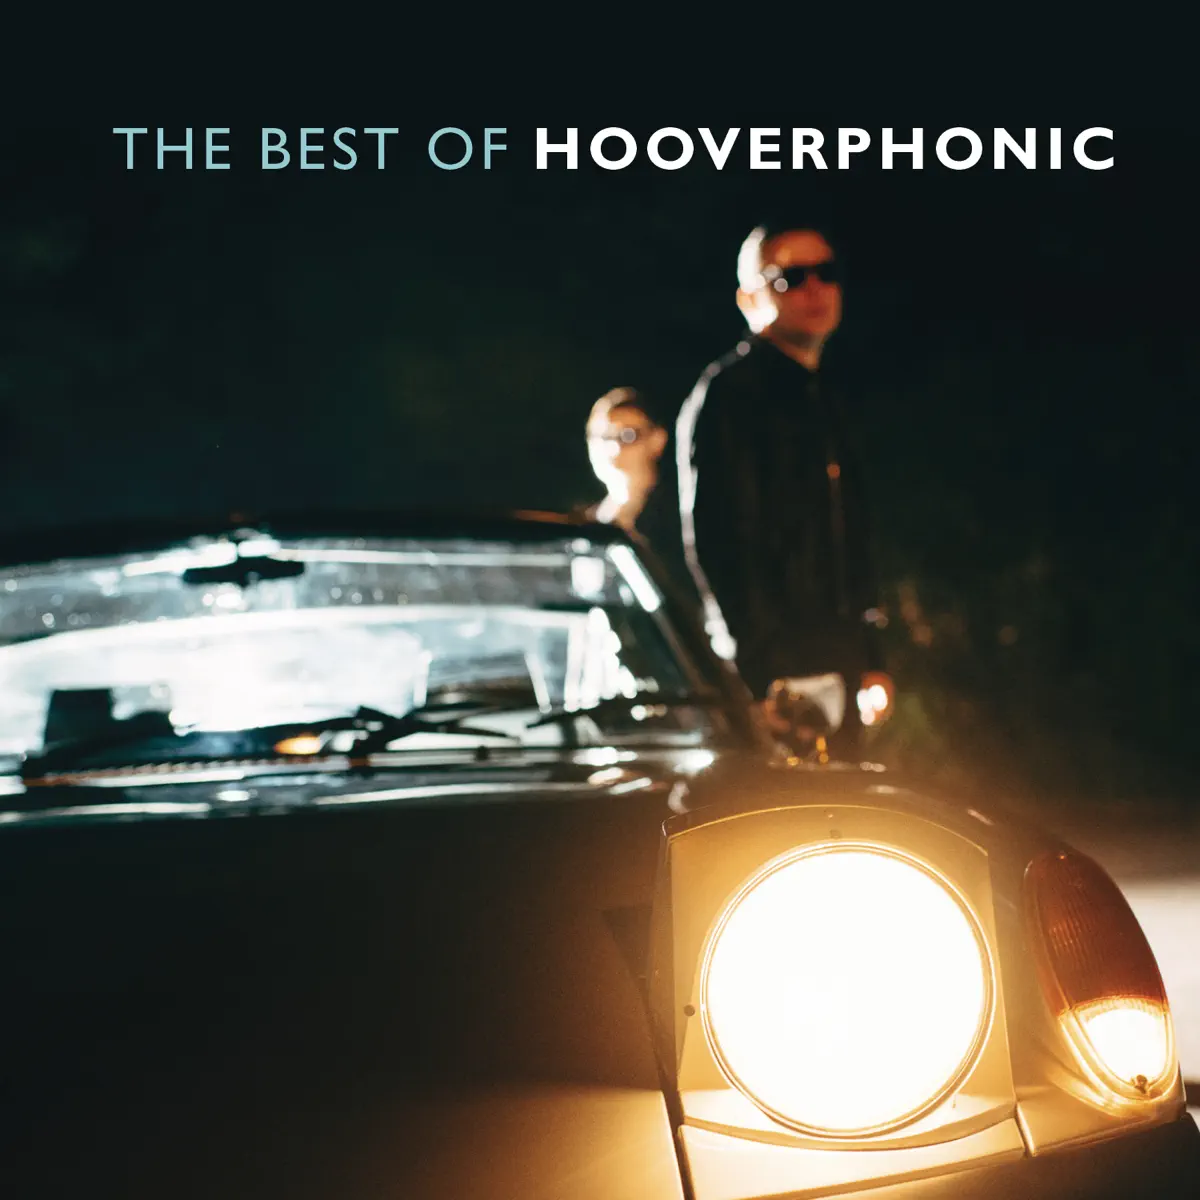 Hooverphonic - The Best of Hooverphonic (2016) [iTunes Plus AAC M4A]-新房子